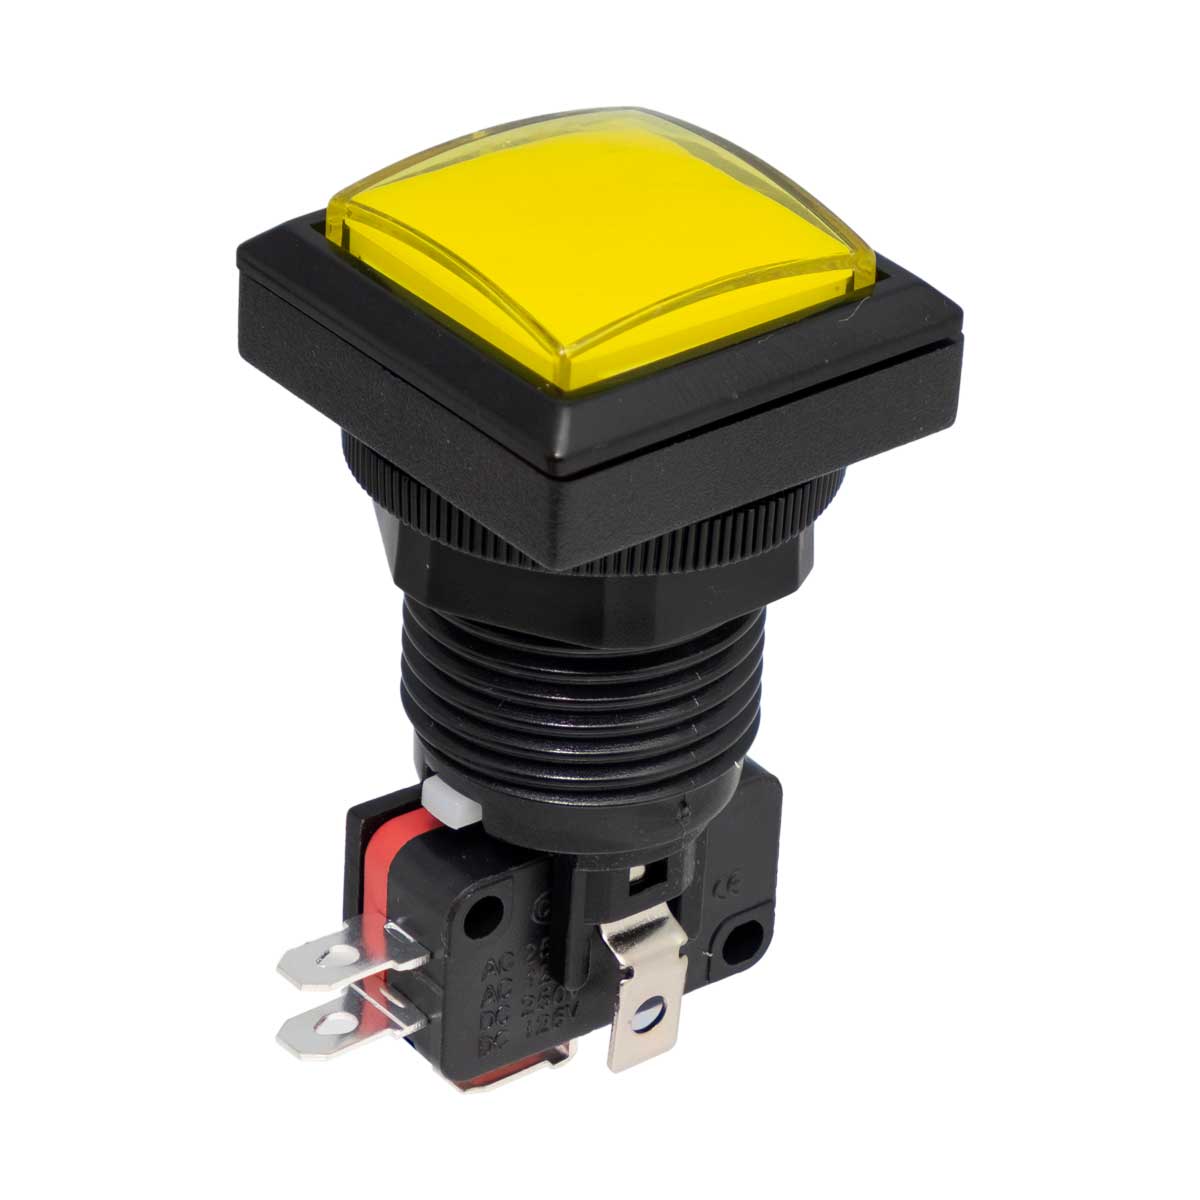 Arcade pushbutton with yellow LED, 25x25mm, Ø24mm, 16A/250V AC